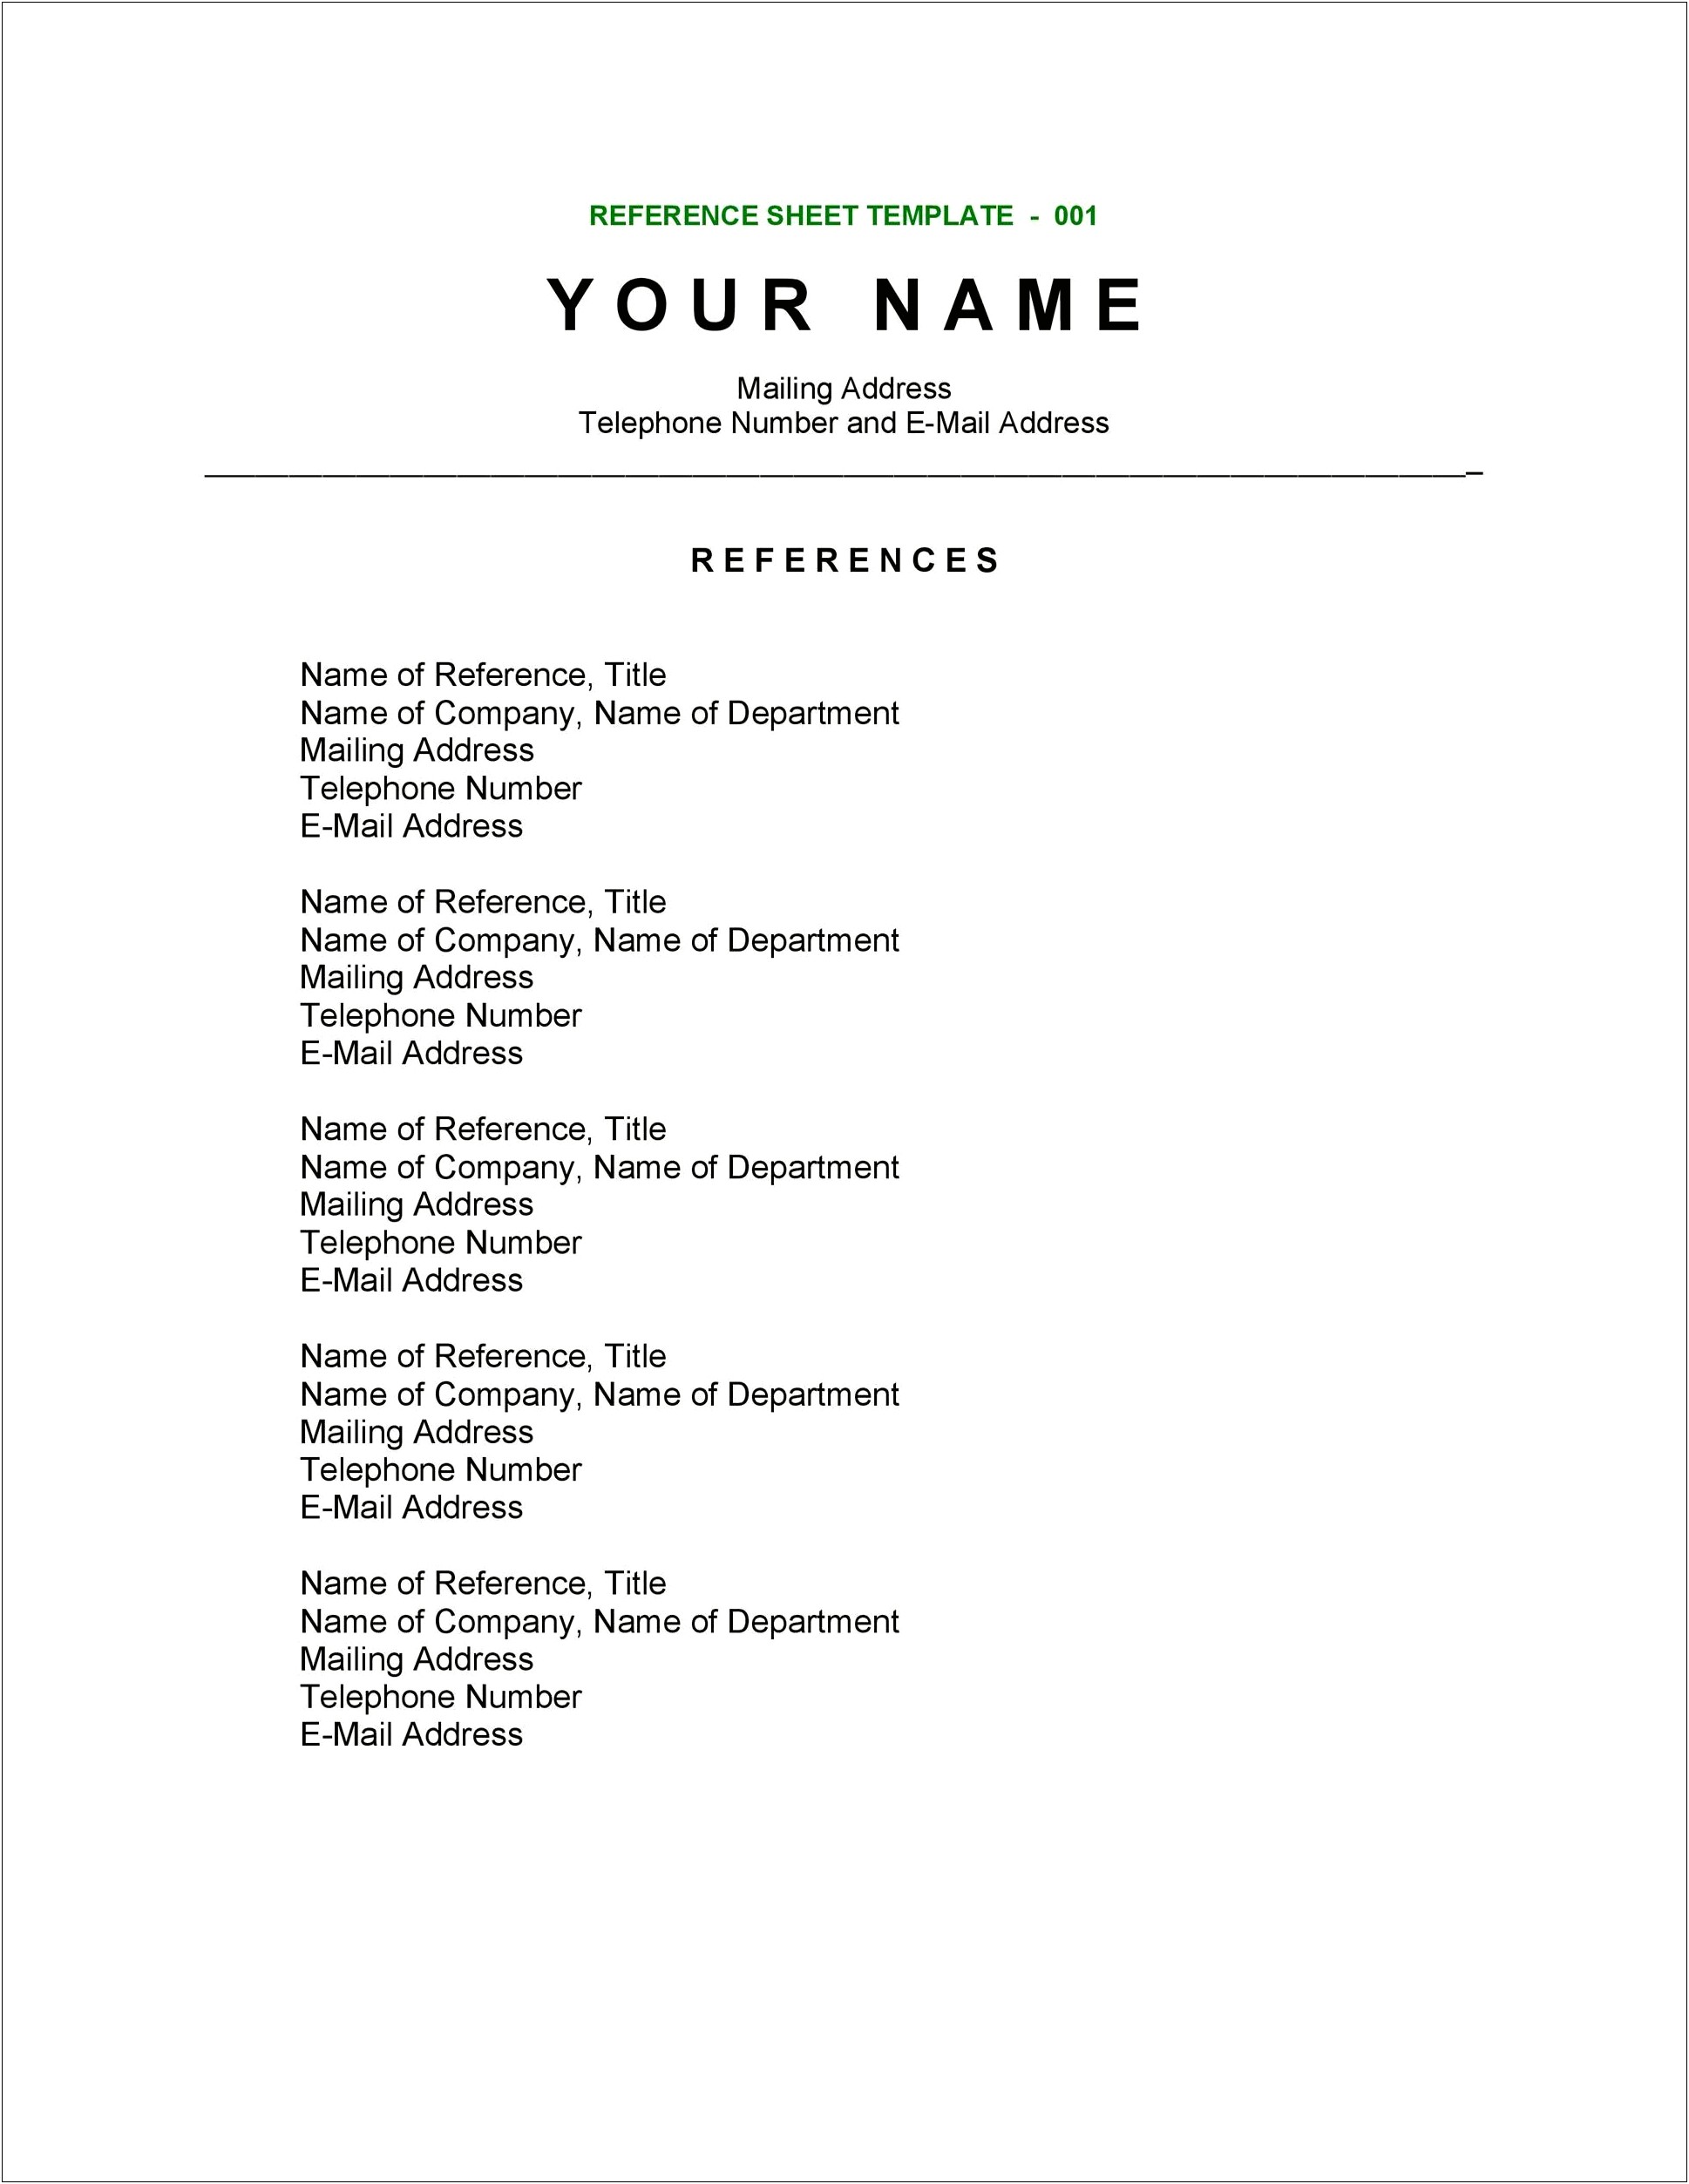 Samples Of Reference Pages To Resumes